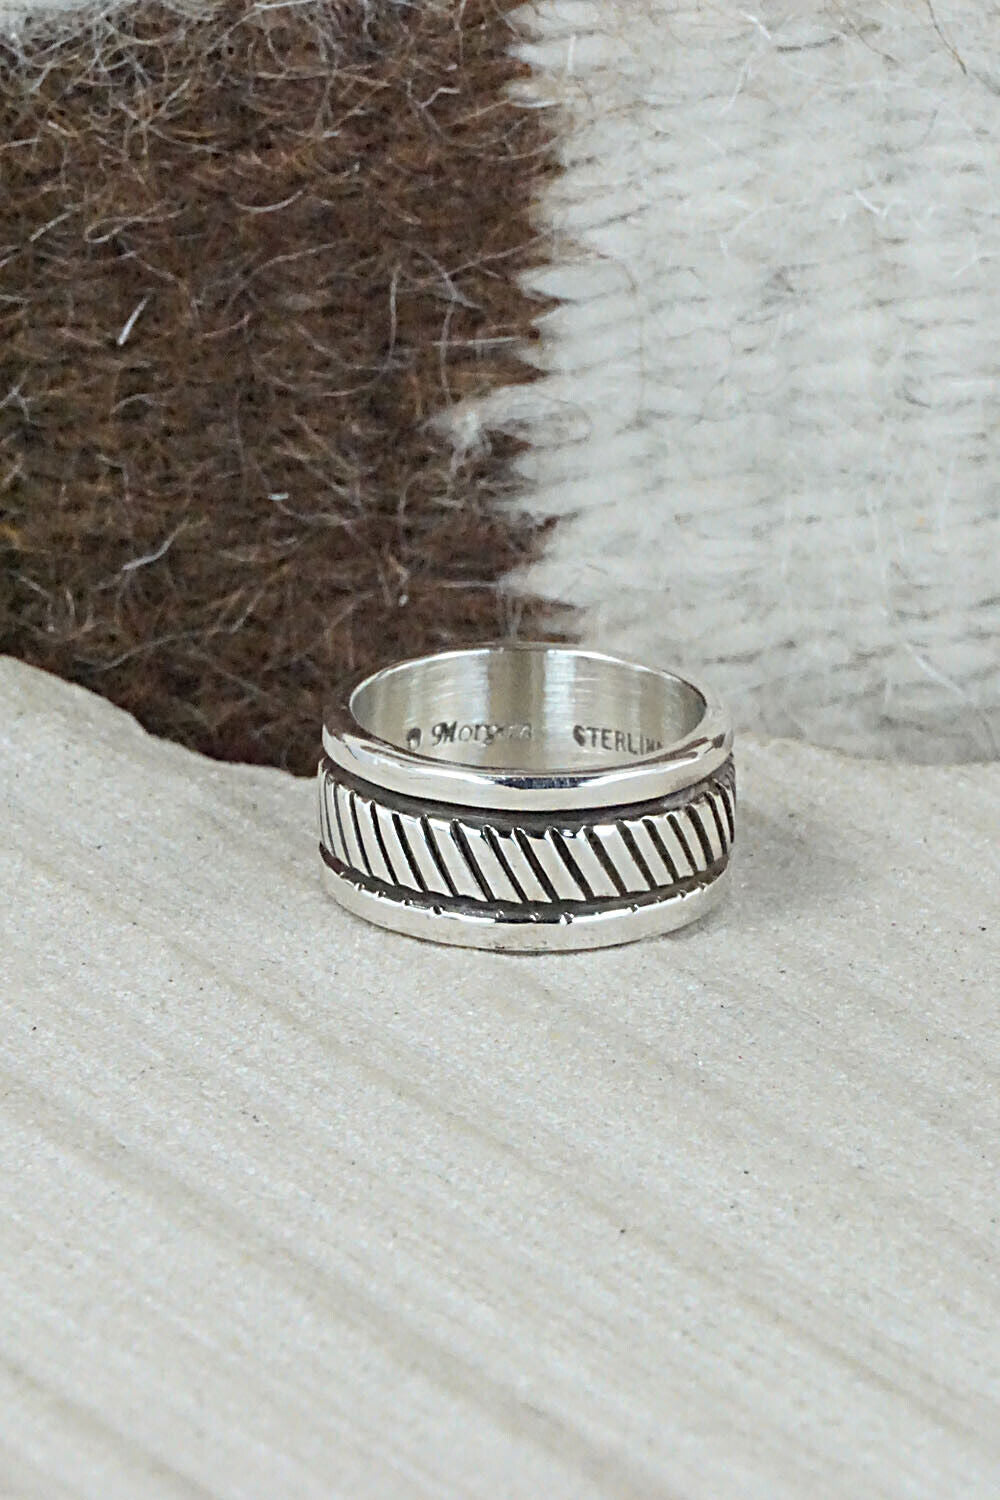 Sterling Silver Ring - Bruce Morgan - Size 5.5